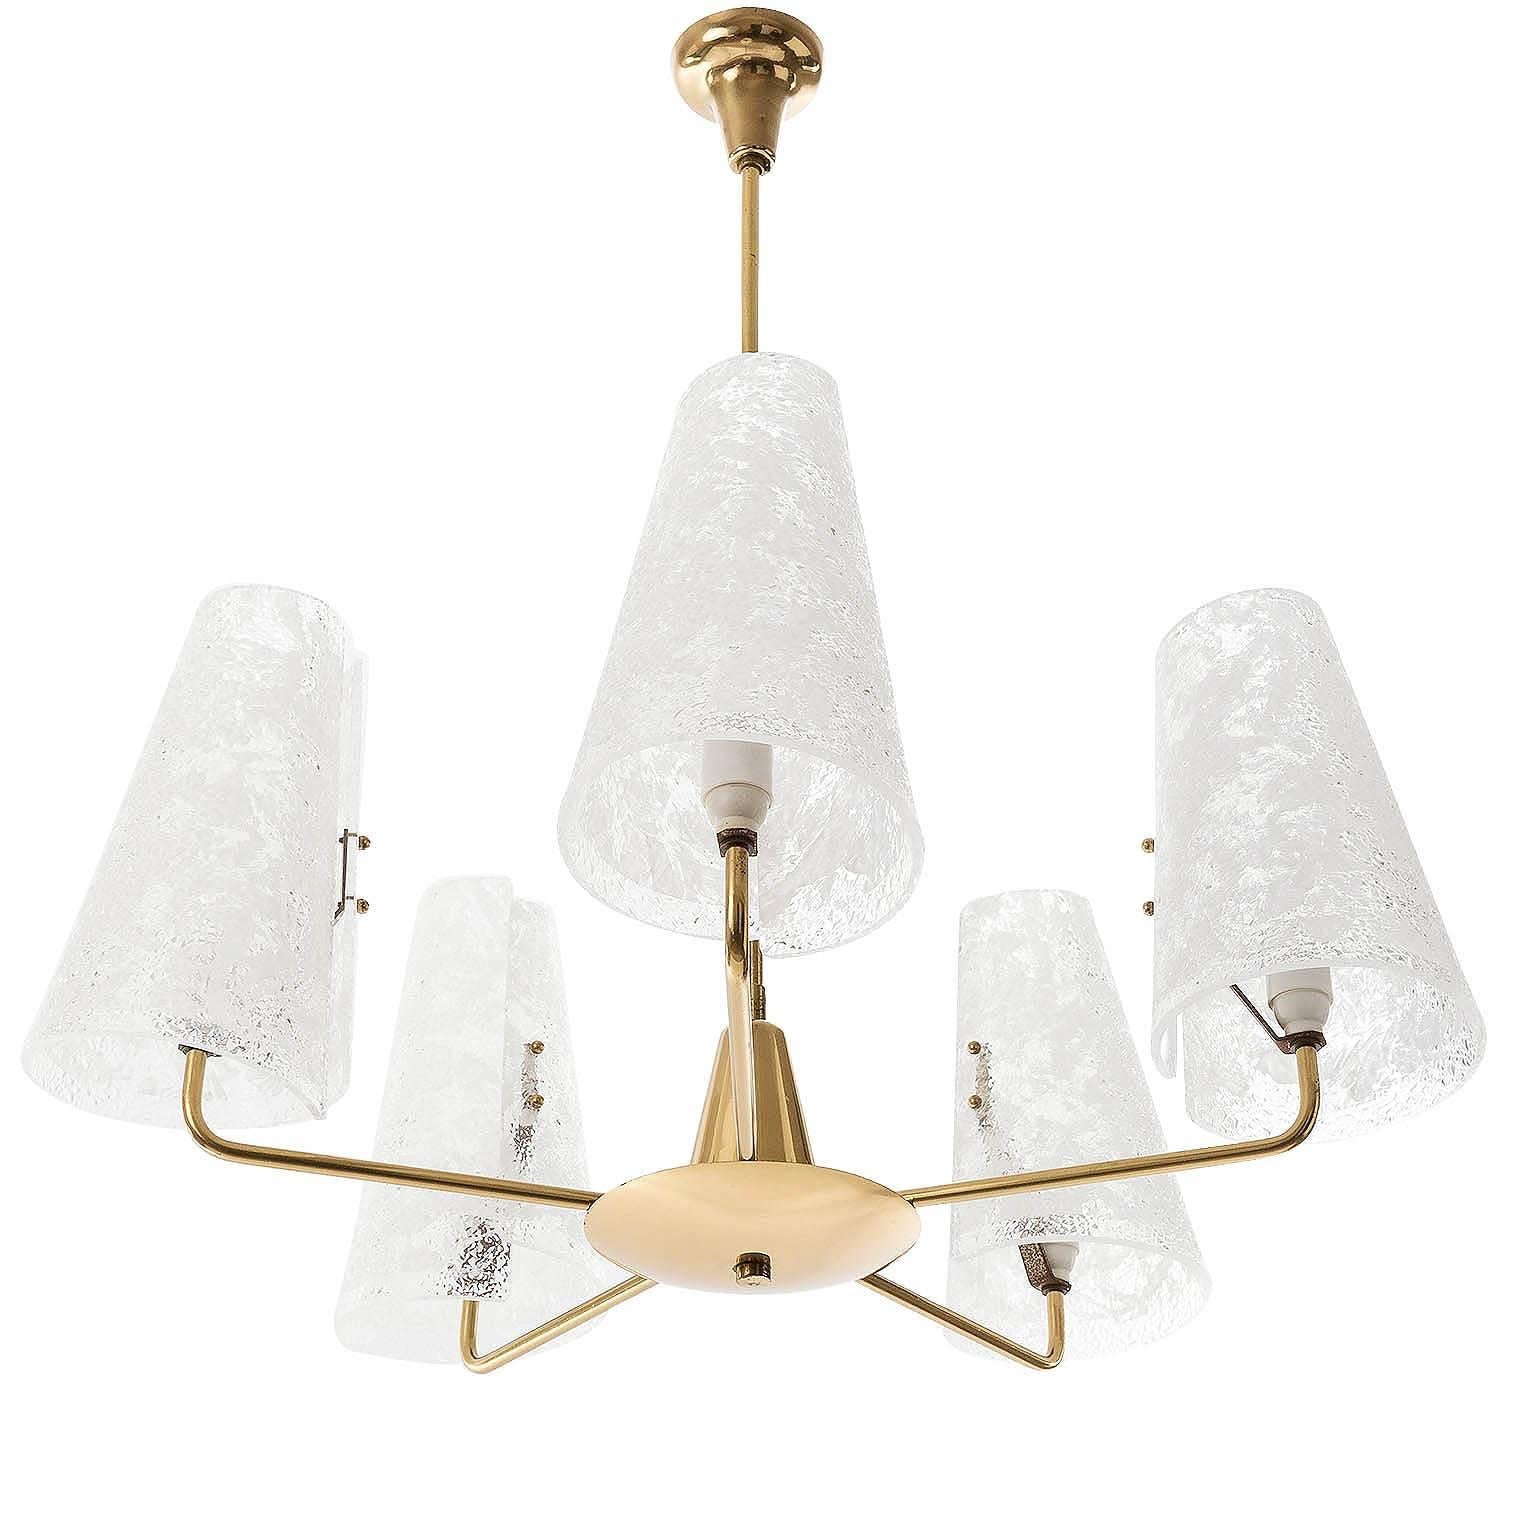 An Austrian solid brass and Lucite chandelier, manufactured in Mid-Century, circa 1950. 
The fixture has five arms with sockets for small screw base bulbs (E14 candelabra).
Light bulbs are not included. It is possible to install this fixture in all